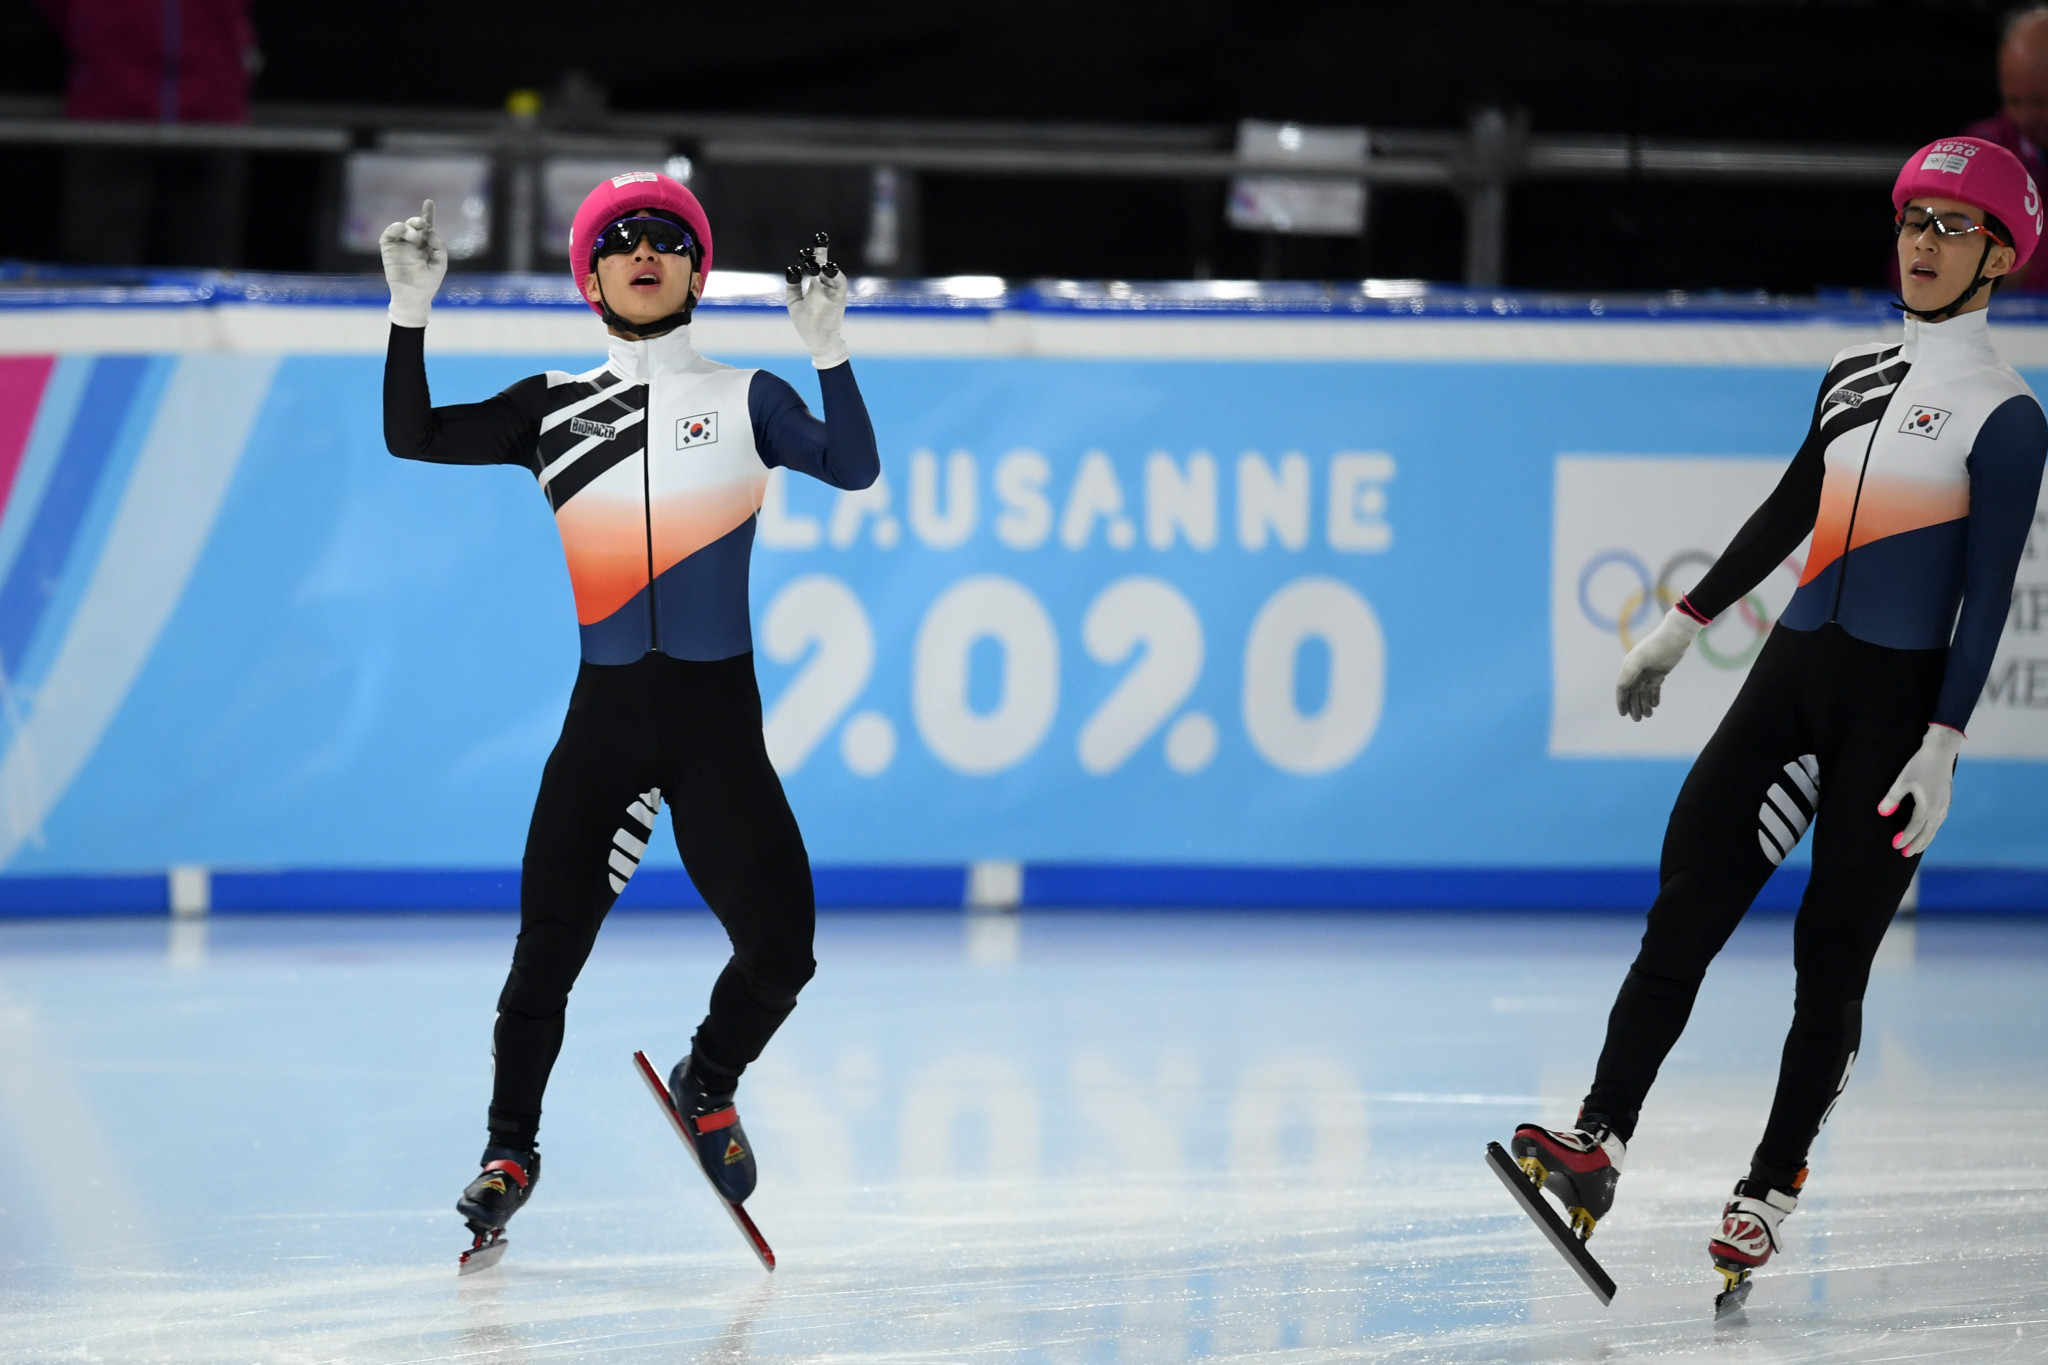 Lee Jeong-min beat team-mate Jang Sung-woo to win the men's 1000m gold ©Getty Images